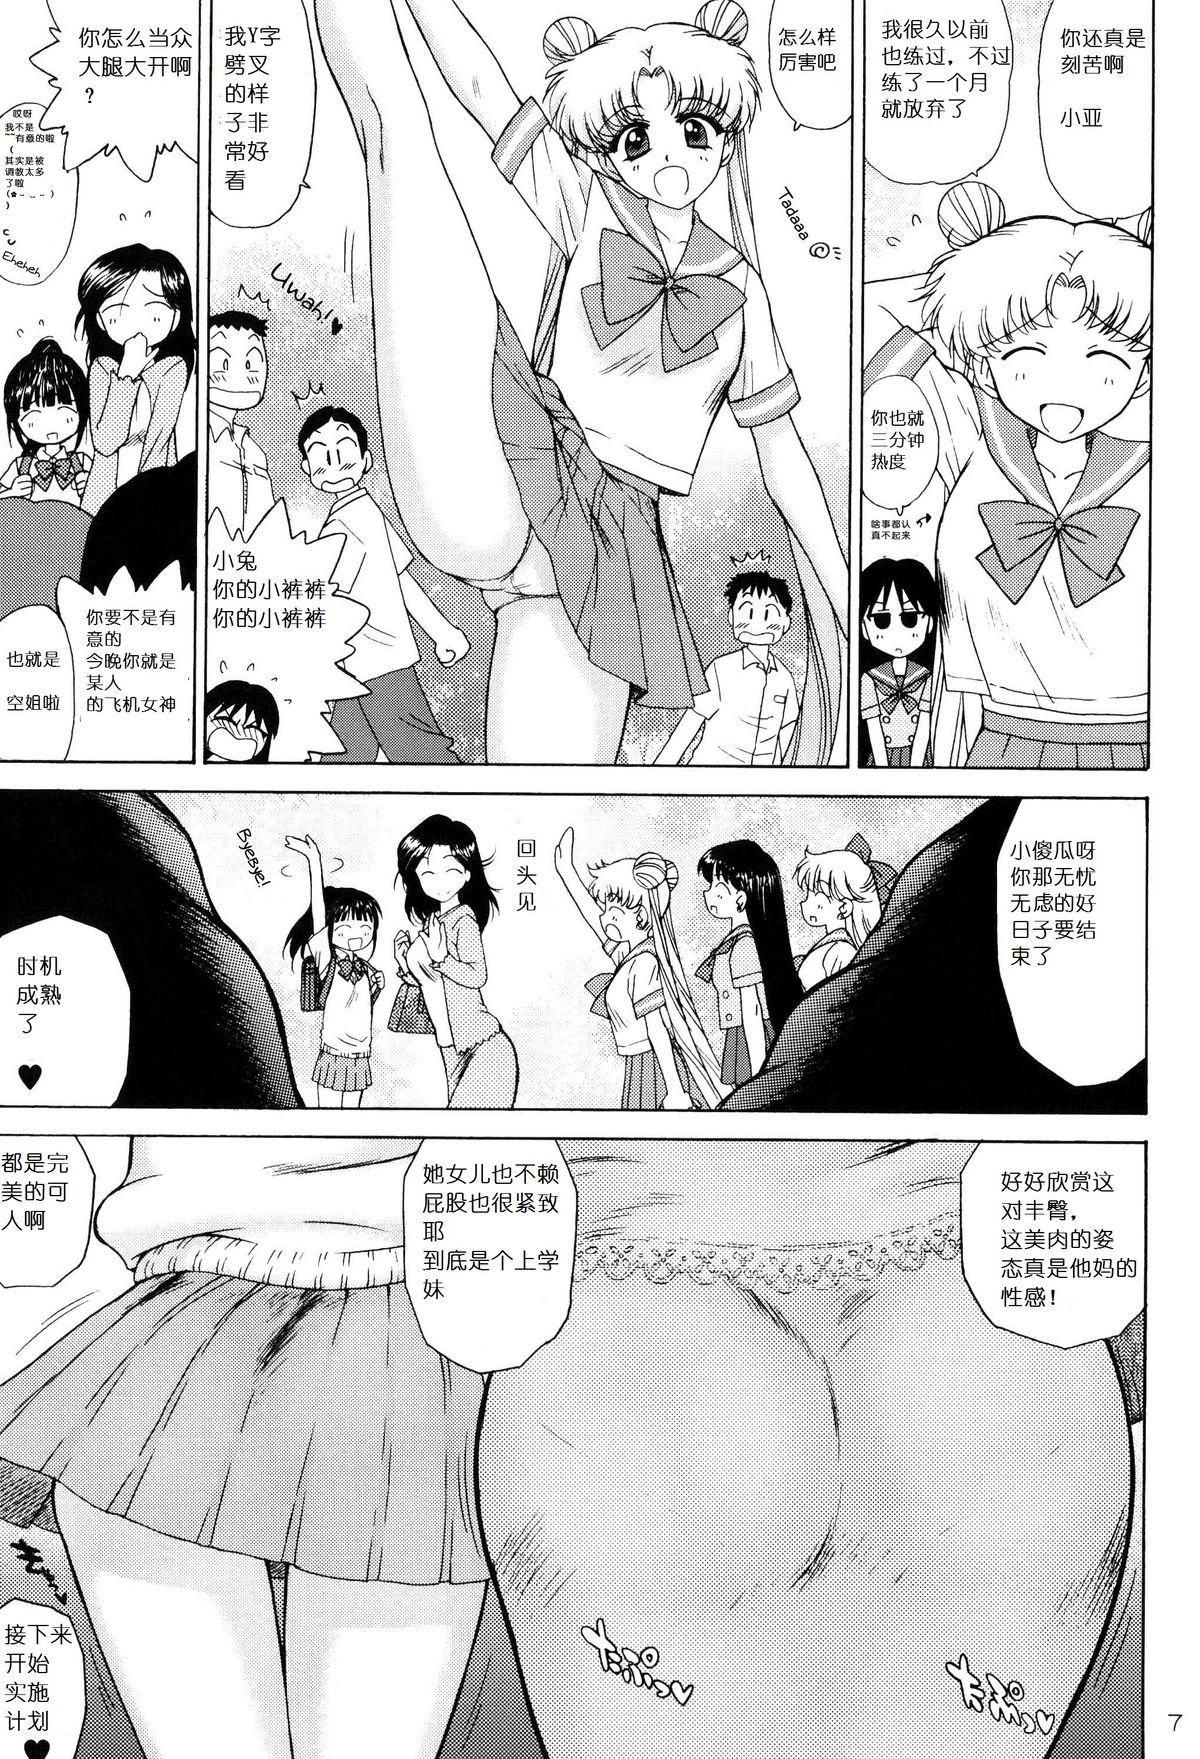 Free Fuck Clips SUBMISSION-SUPER MOON - Sailor moon Ex Gf - Page 7